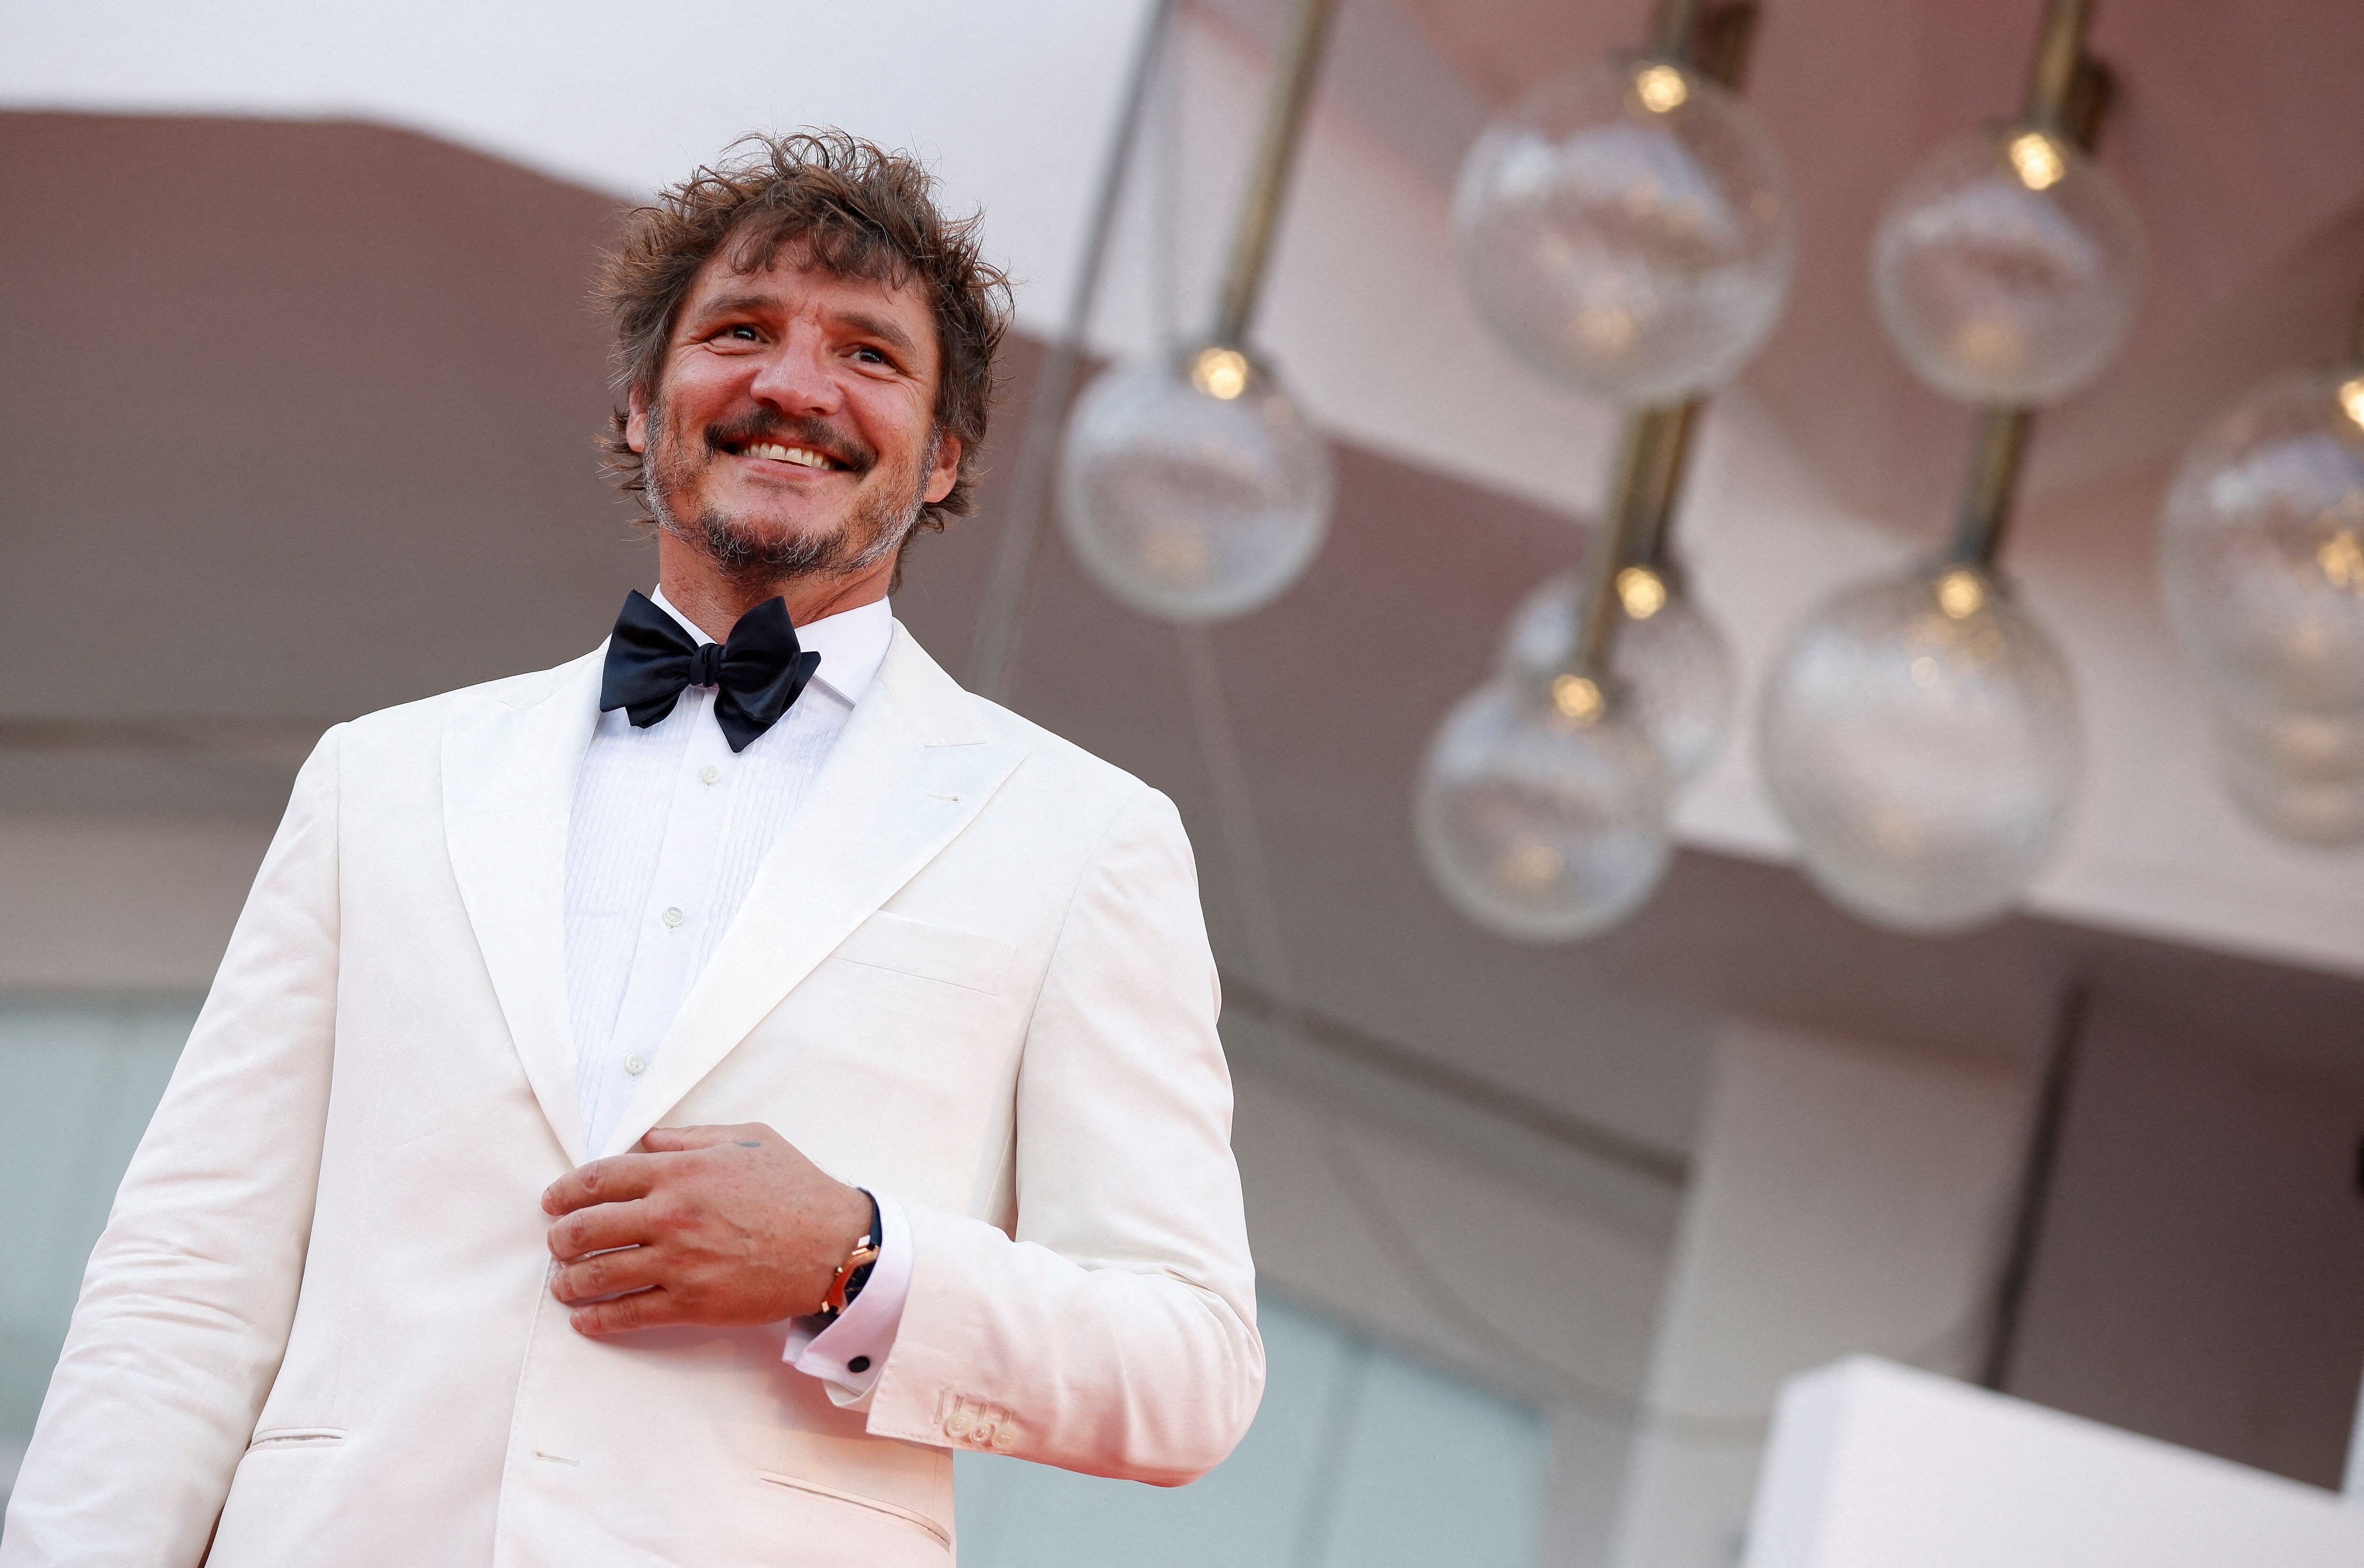 FILE PHOTO: The 79th Venice Film Festival - Premiere screening of the film "Argentina, 1985" - Red Carpet Arrivals - Venice, Italy, September 3, 2022. Actor Pedro Pascal poses. REUTERS/Guglielmo Mangiapane/File Photo